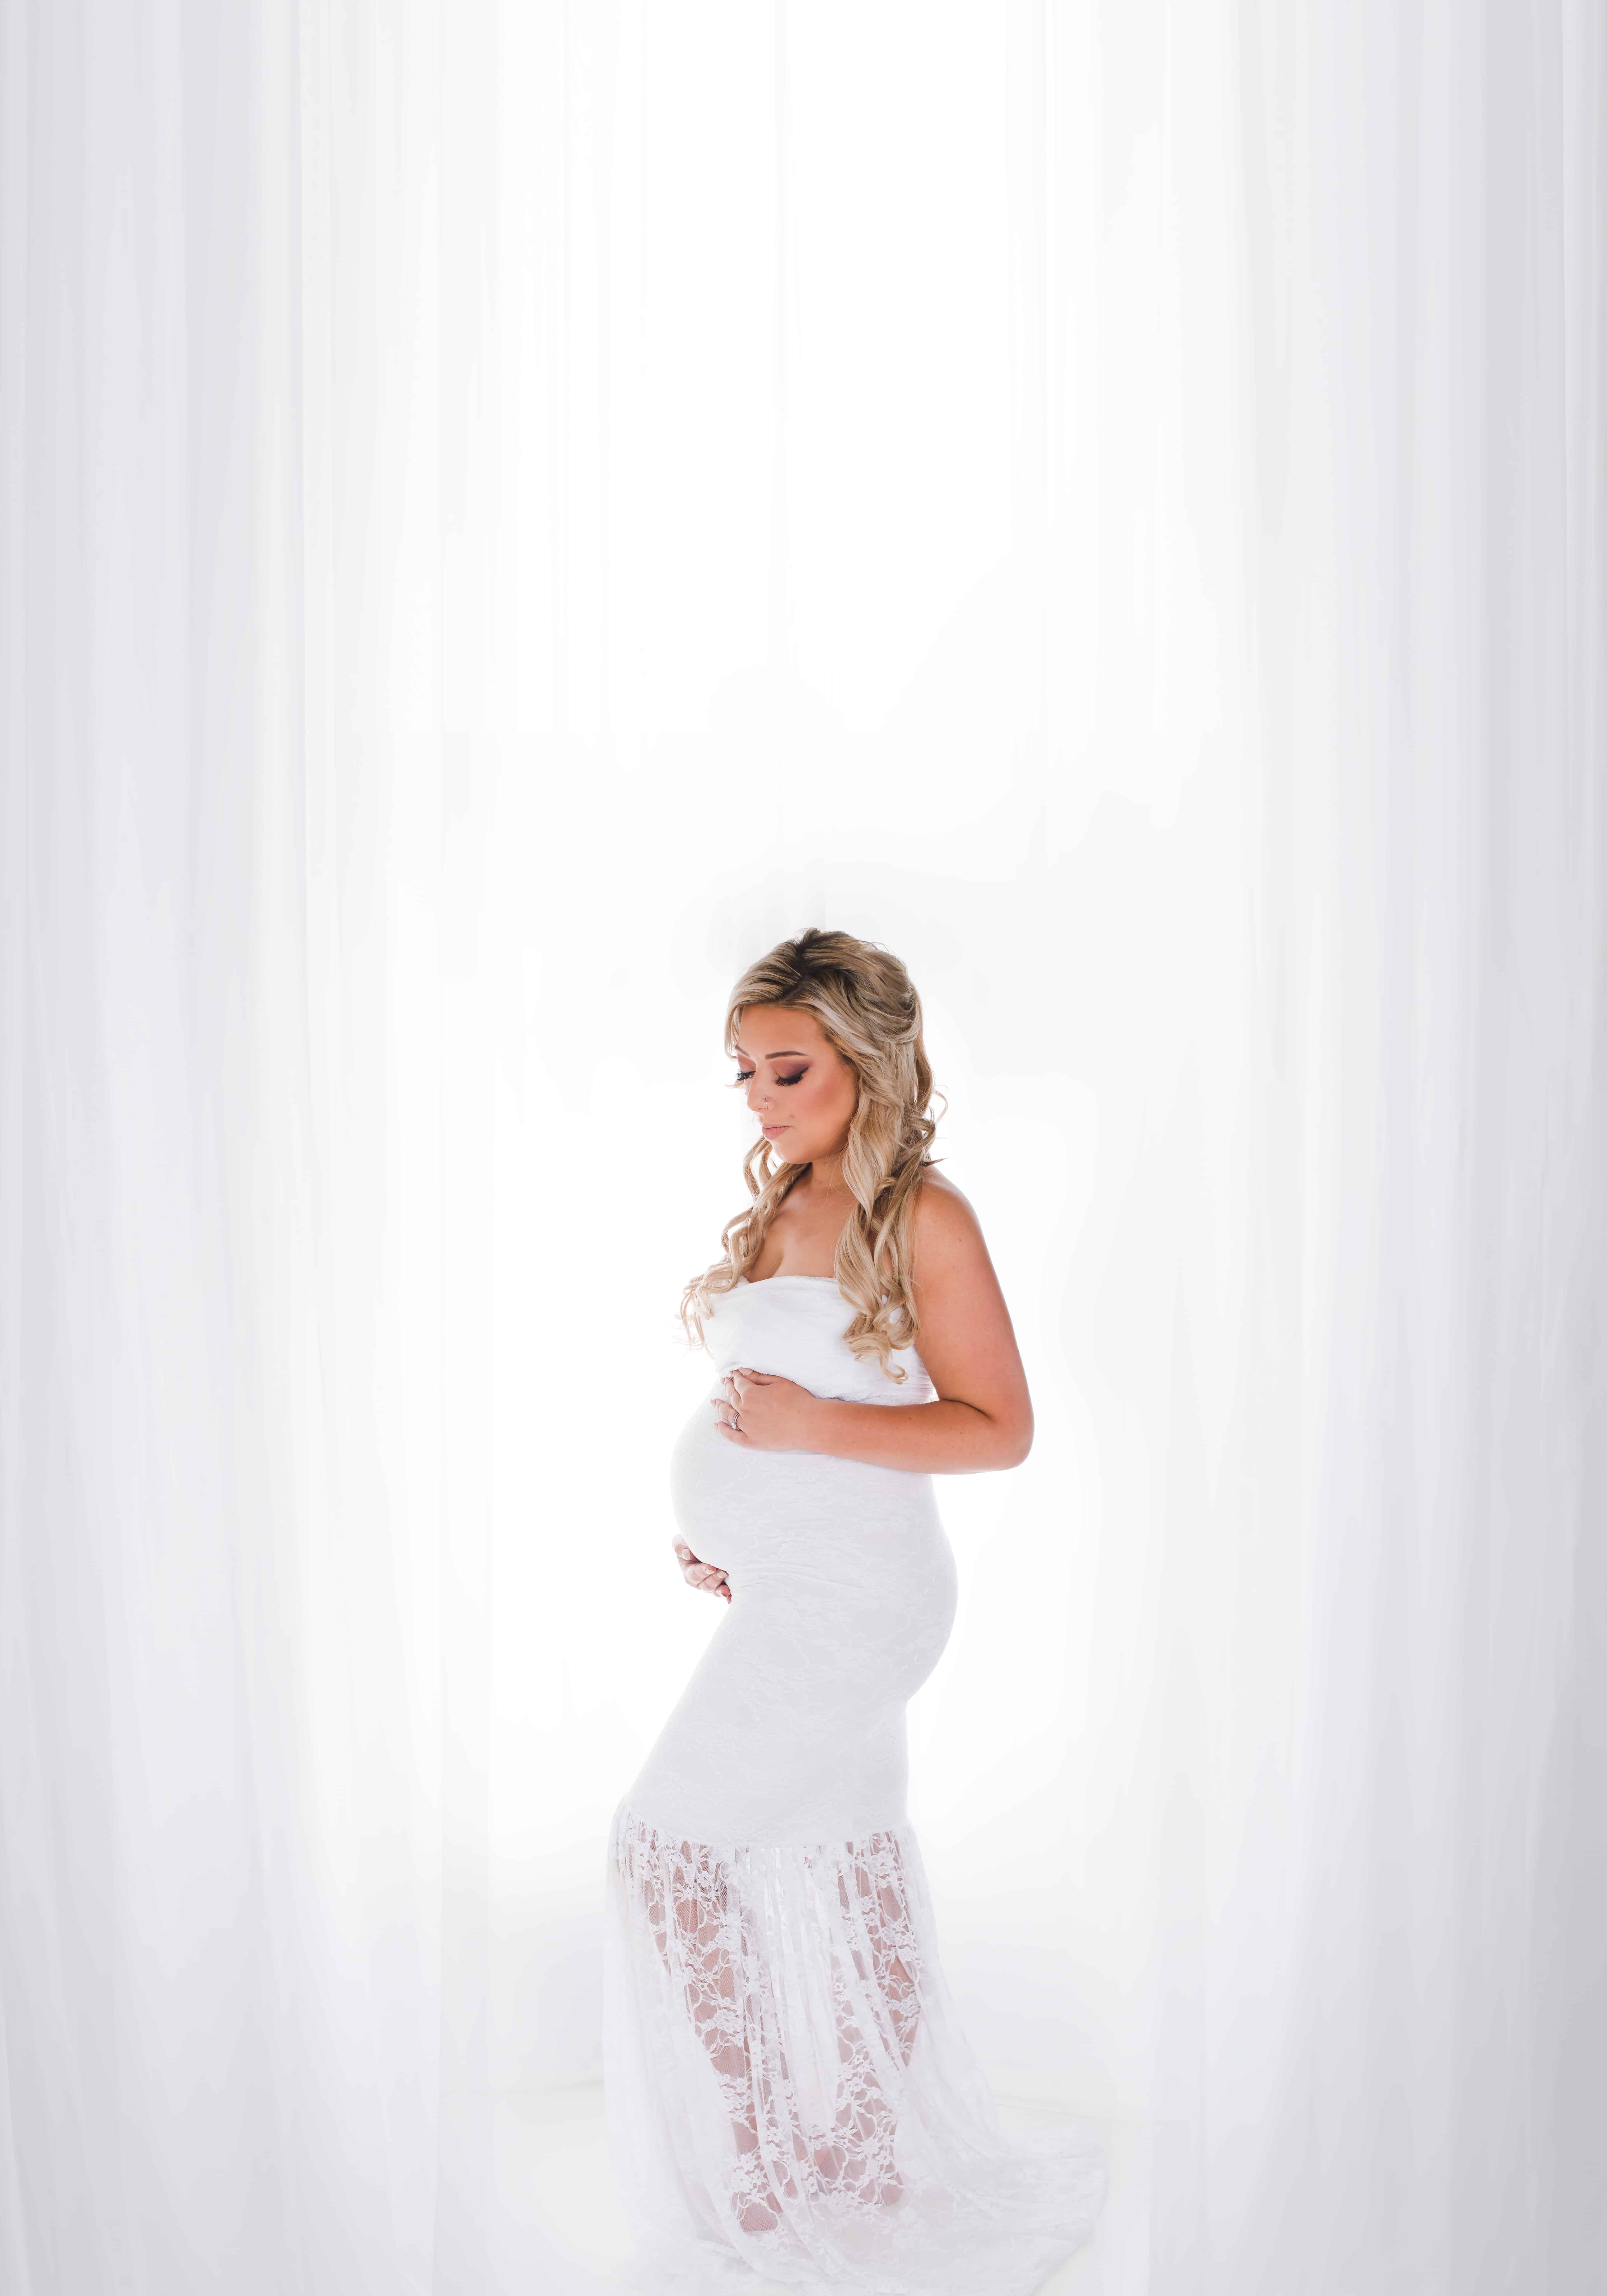 35 Maternity Poses Every Mom-To-Be Needs At Photoshoot